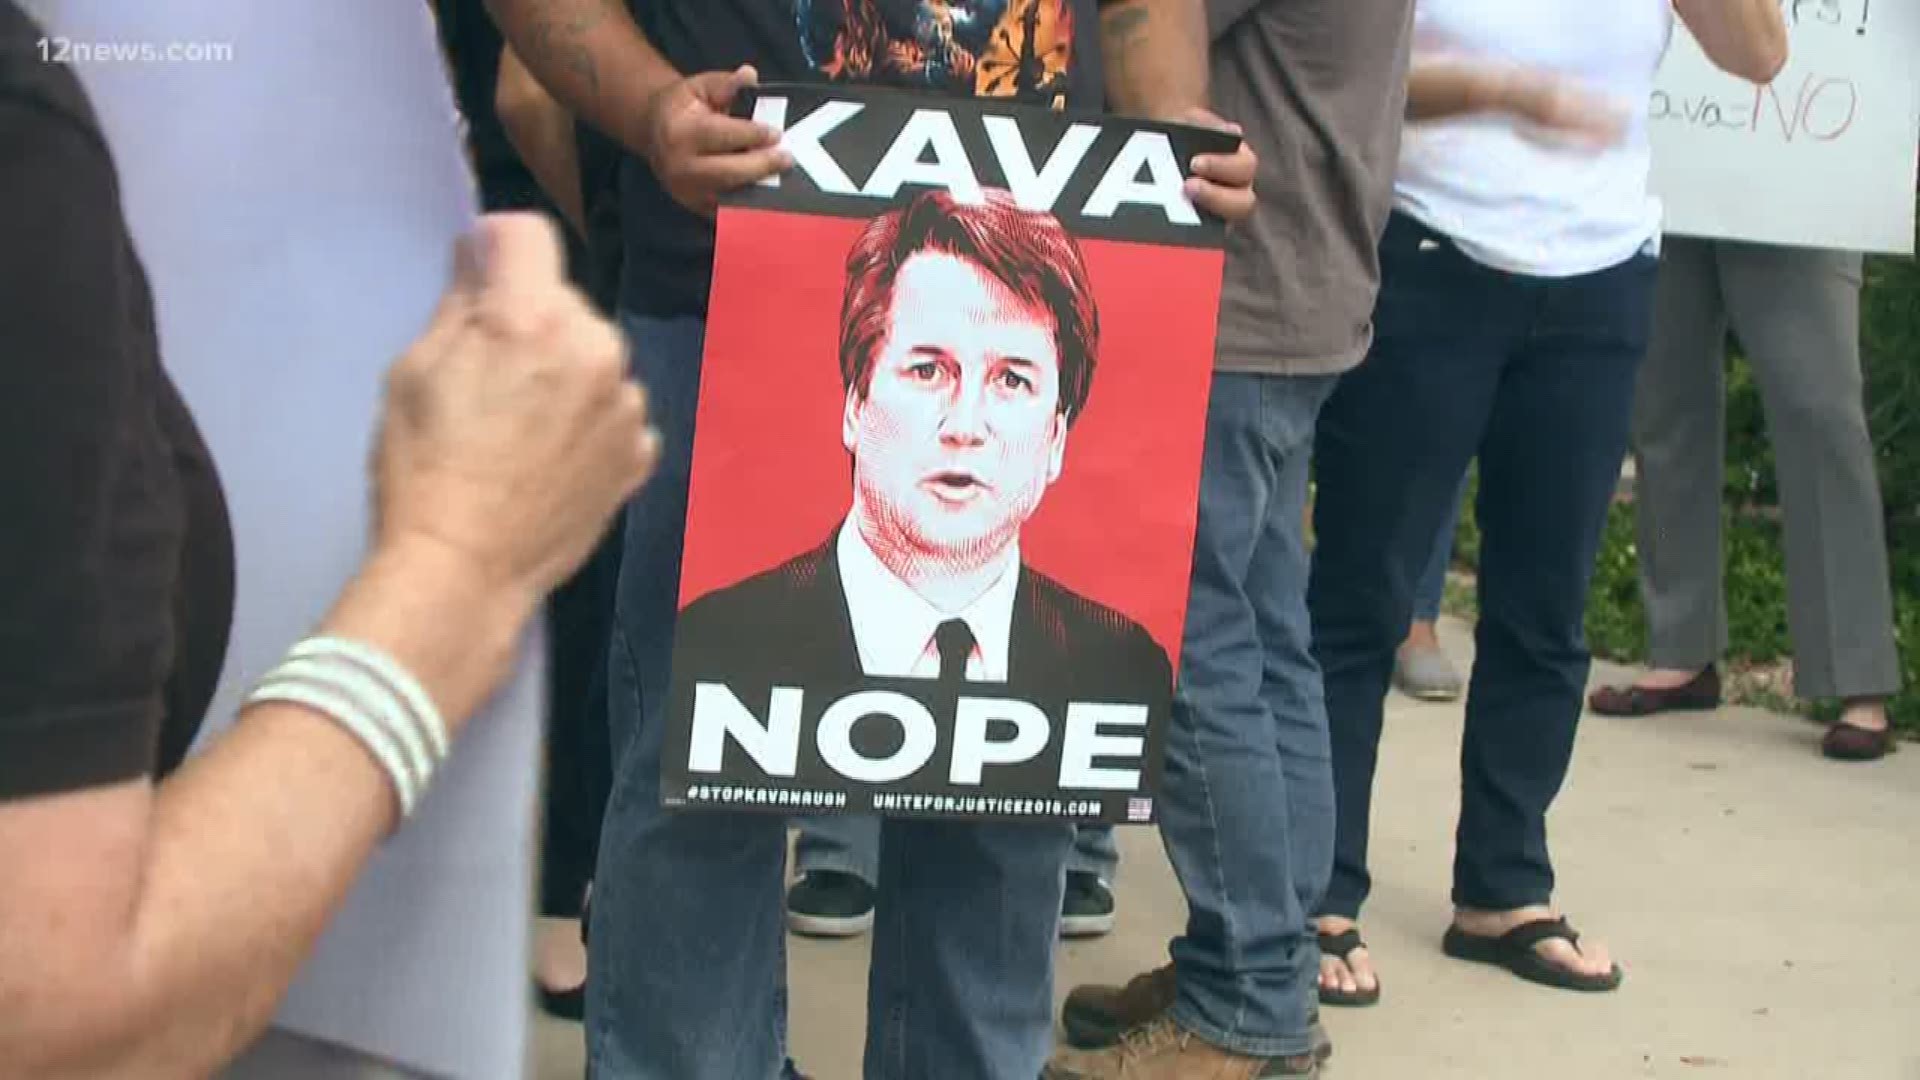 Four protesters were arrested at a protest outside of Senator Flake's. Protesters are trying to get his attention as it seems his vote is still up in the air on Supreme Court nominee Brett Kavanaugh.